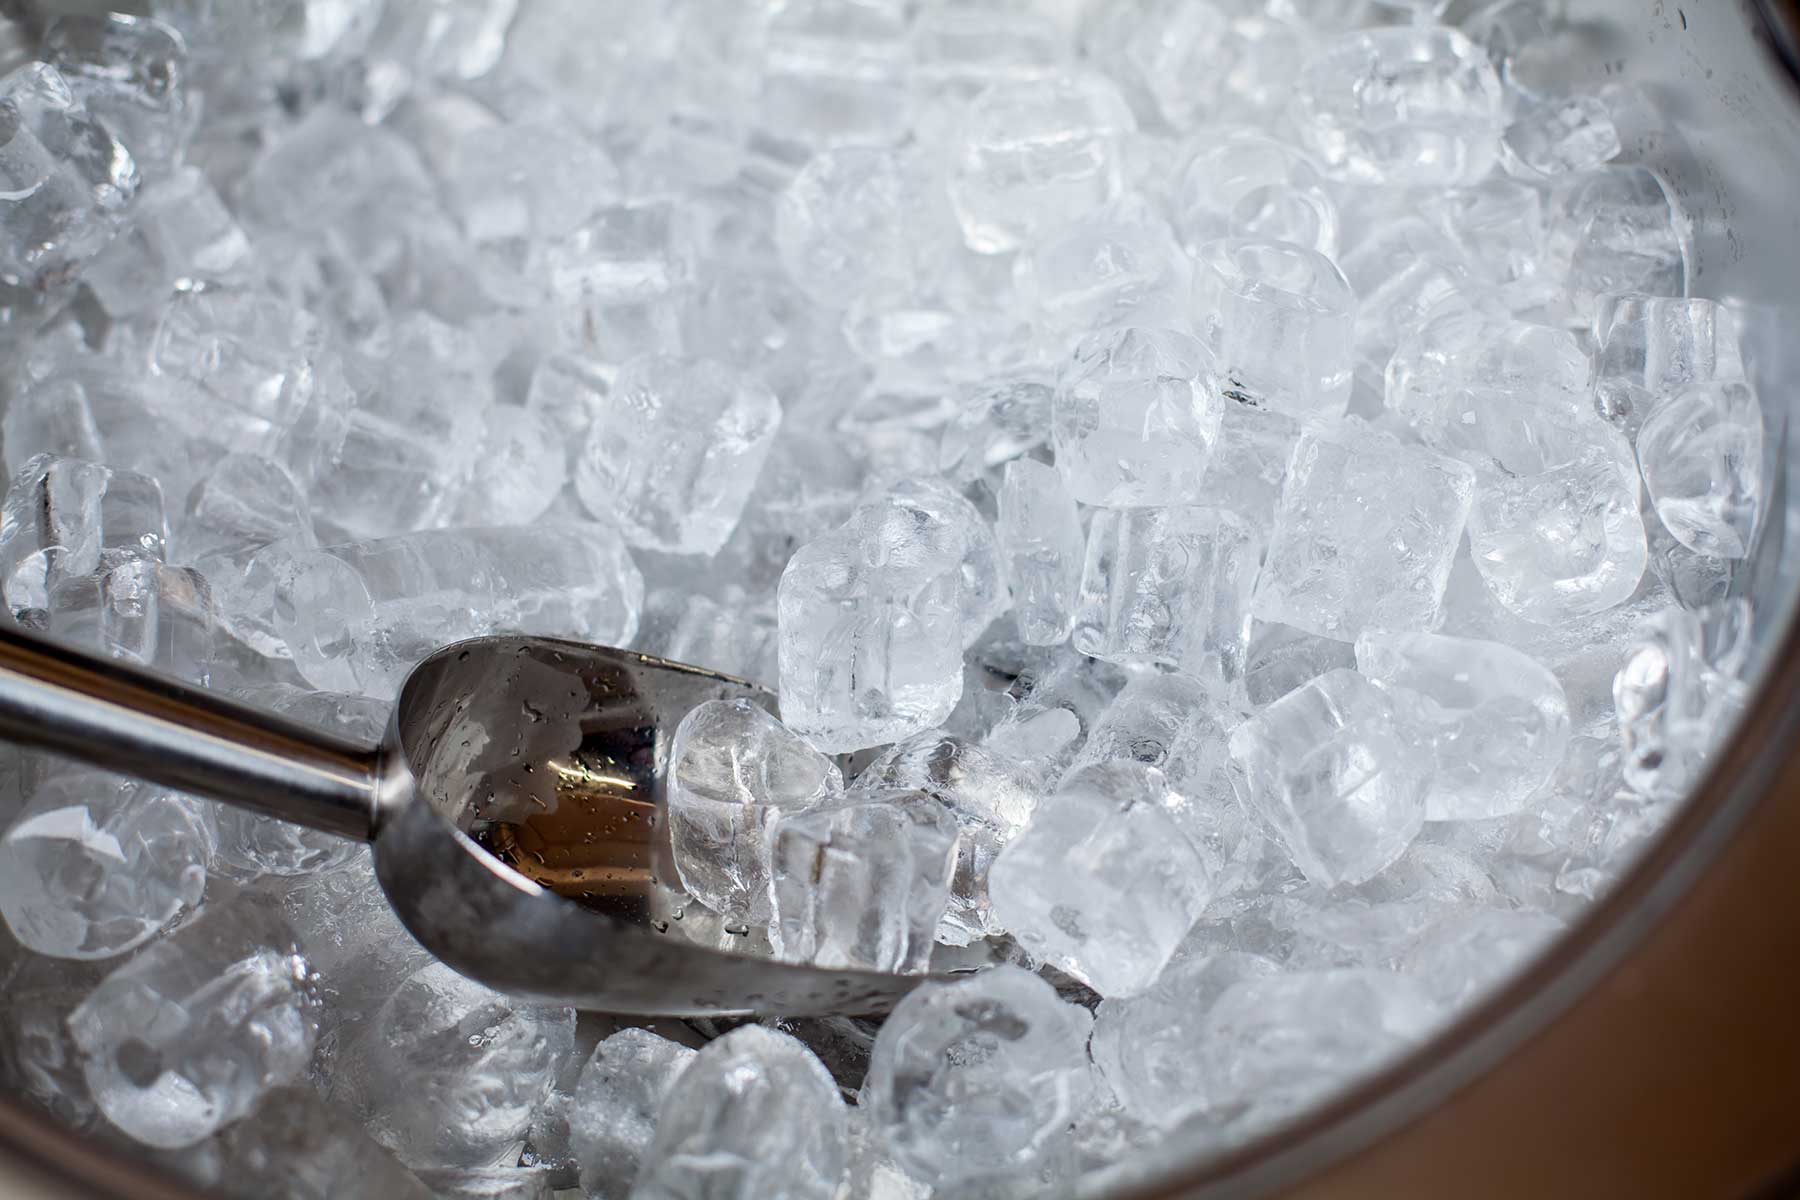 A hospital study of ice machines